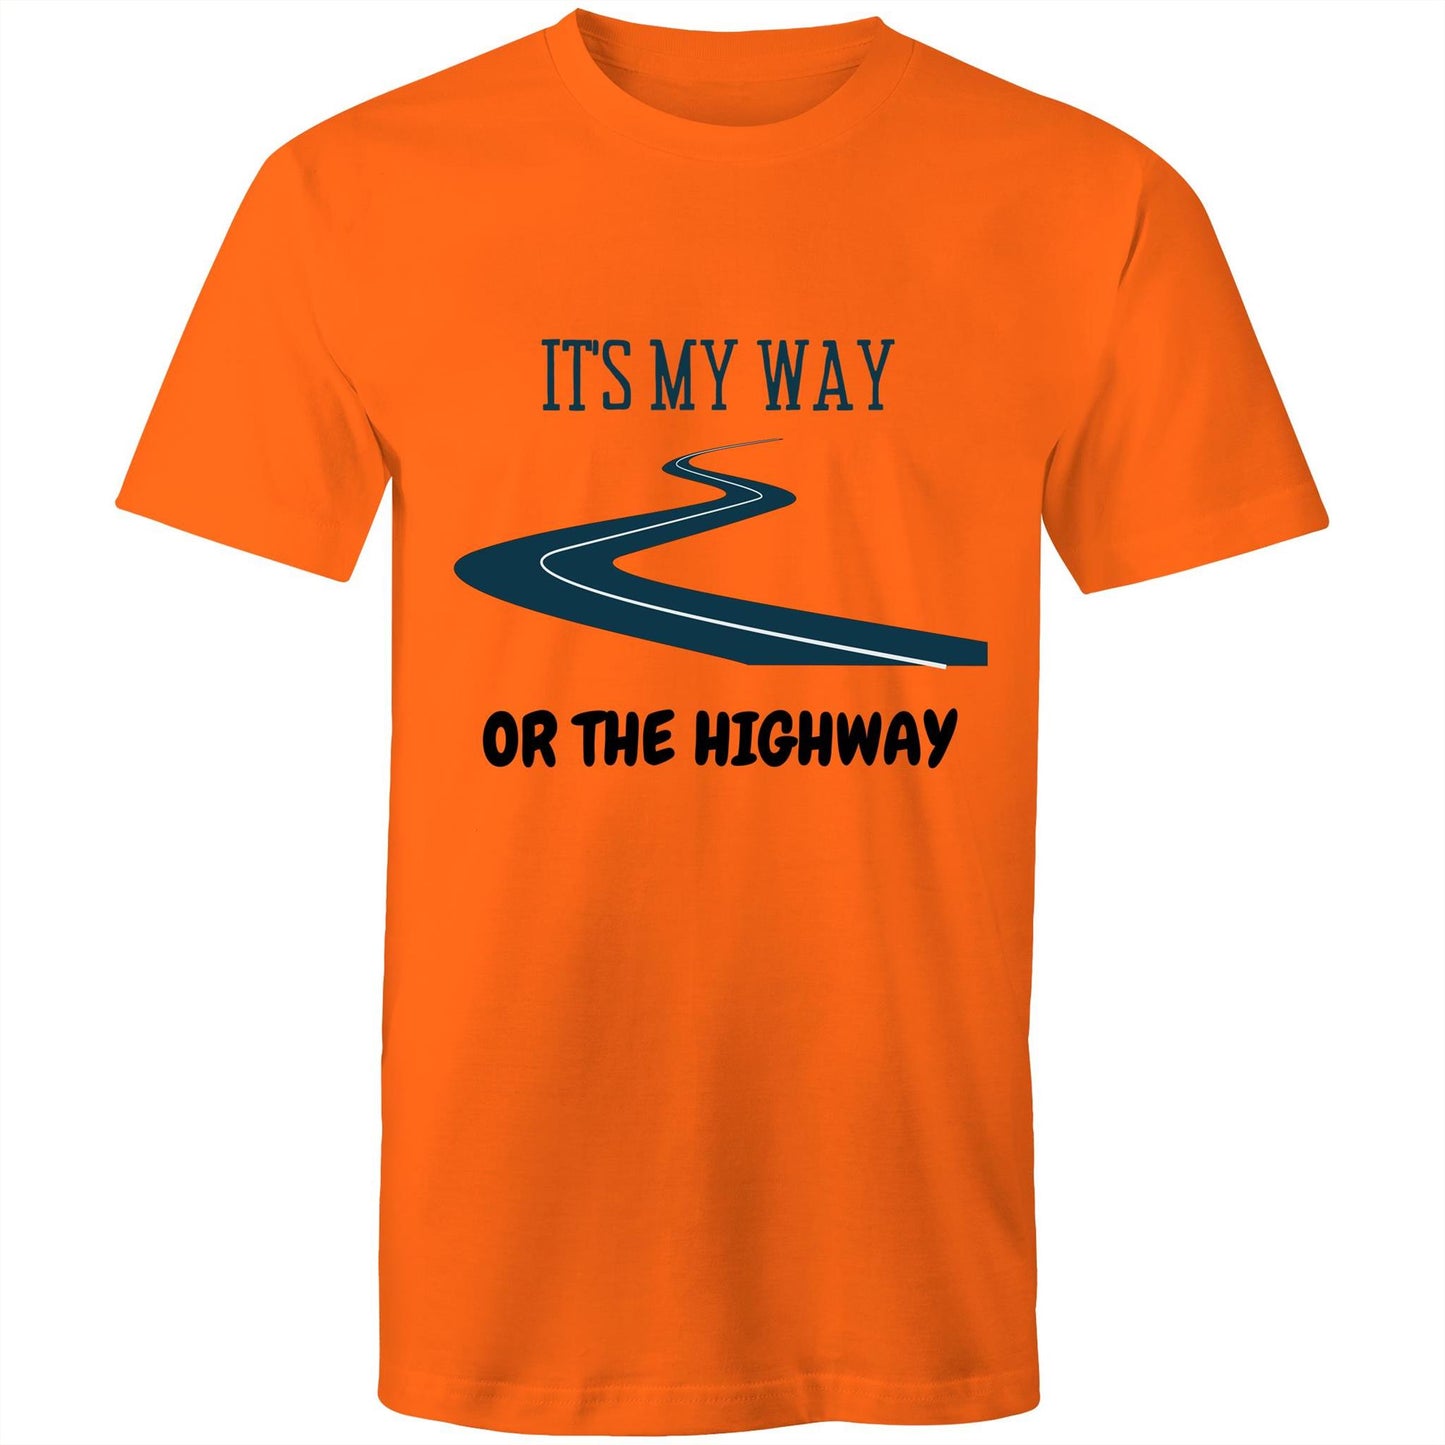 It's My Way Or The Highway - Mens T-Shirt